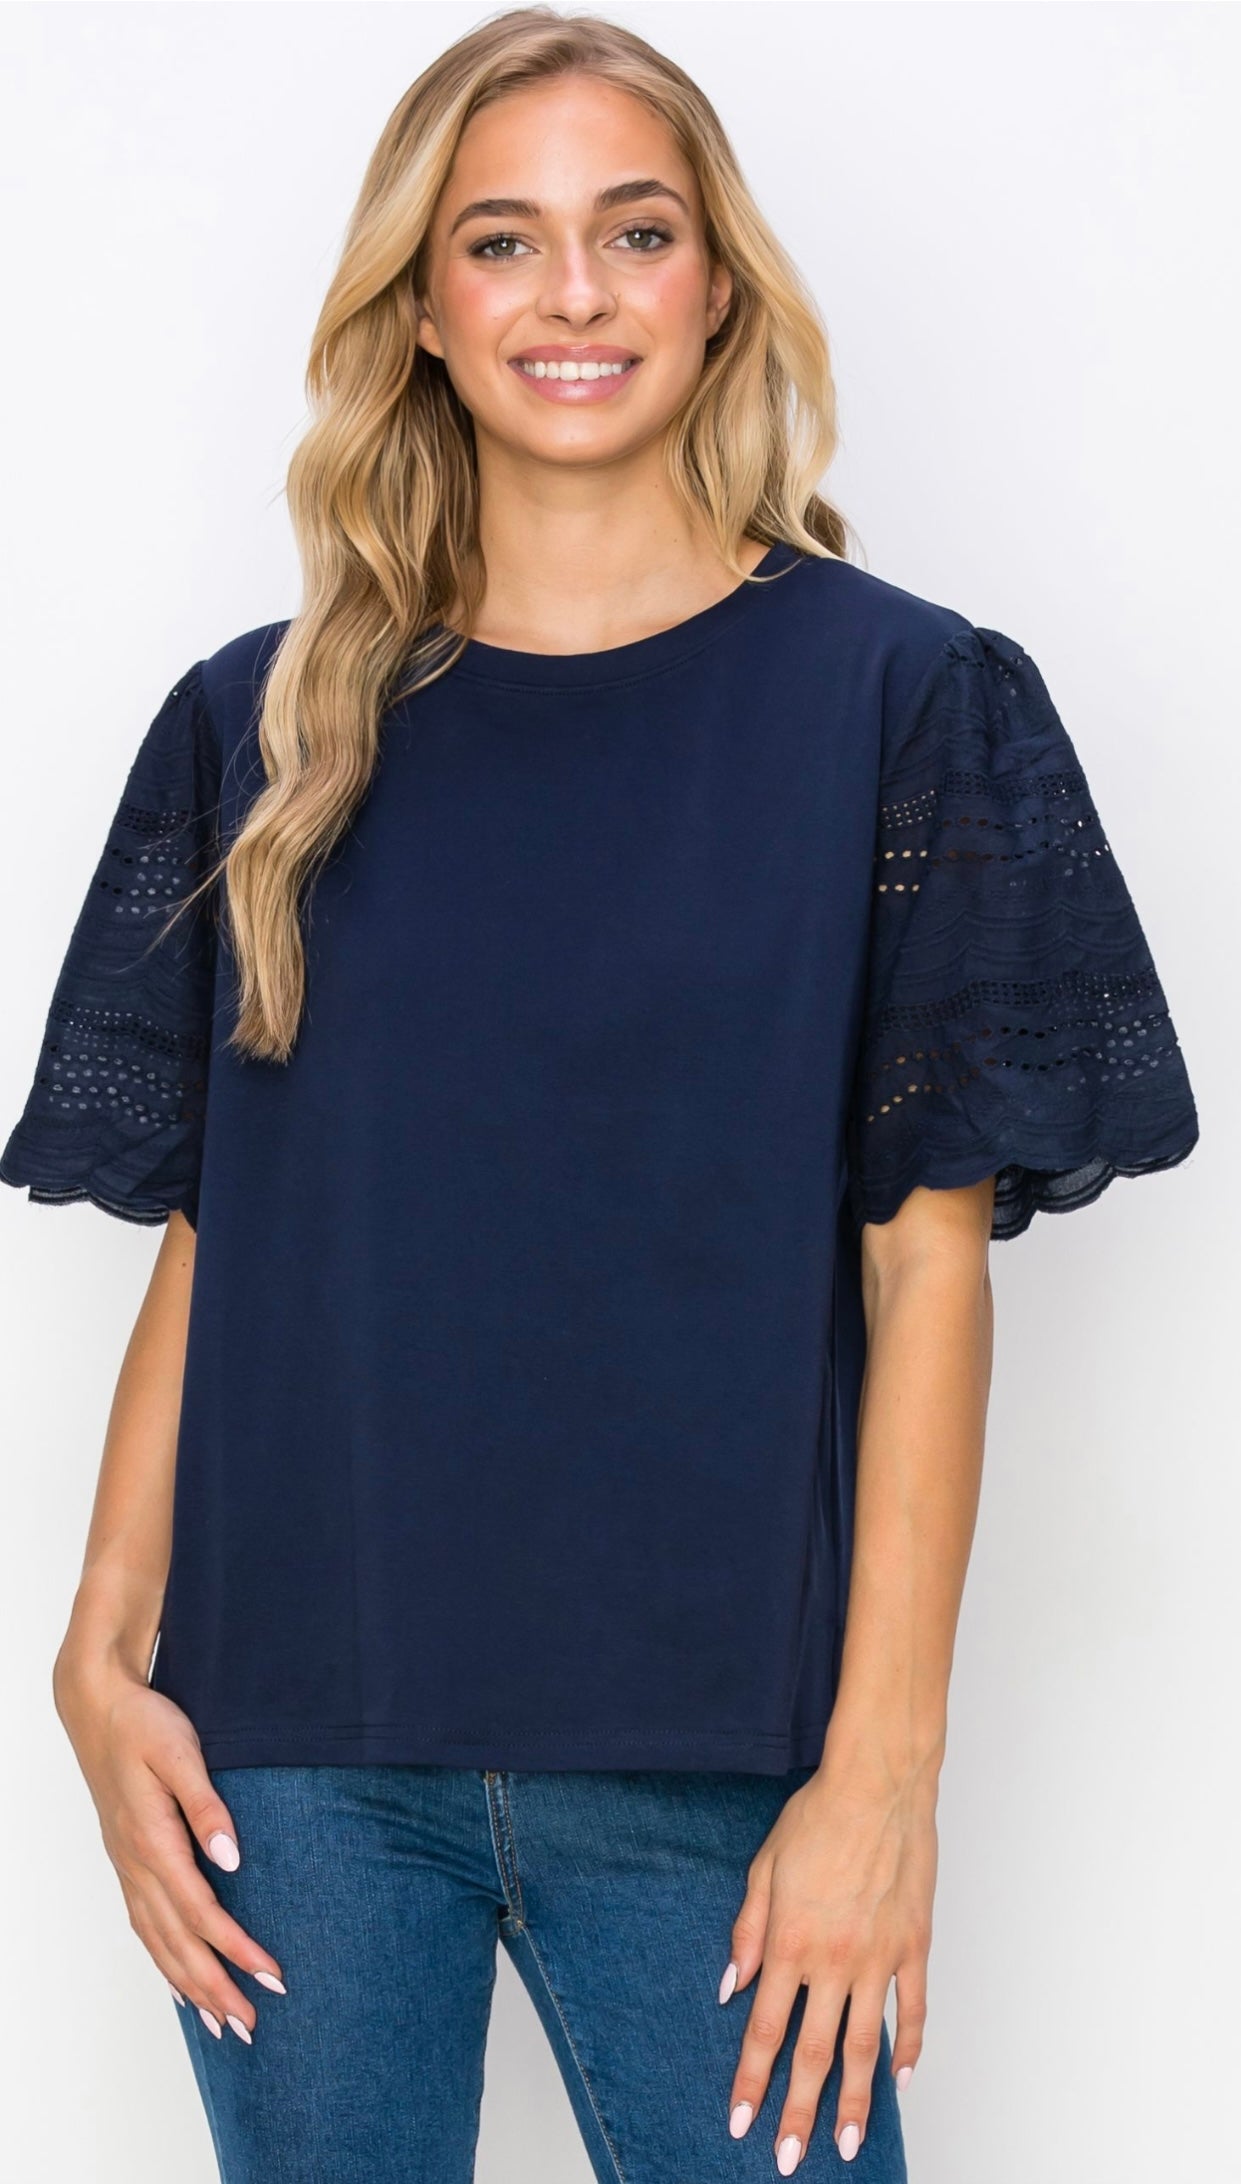 Ramona Top with Lace Eyelet